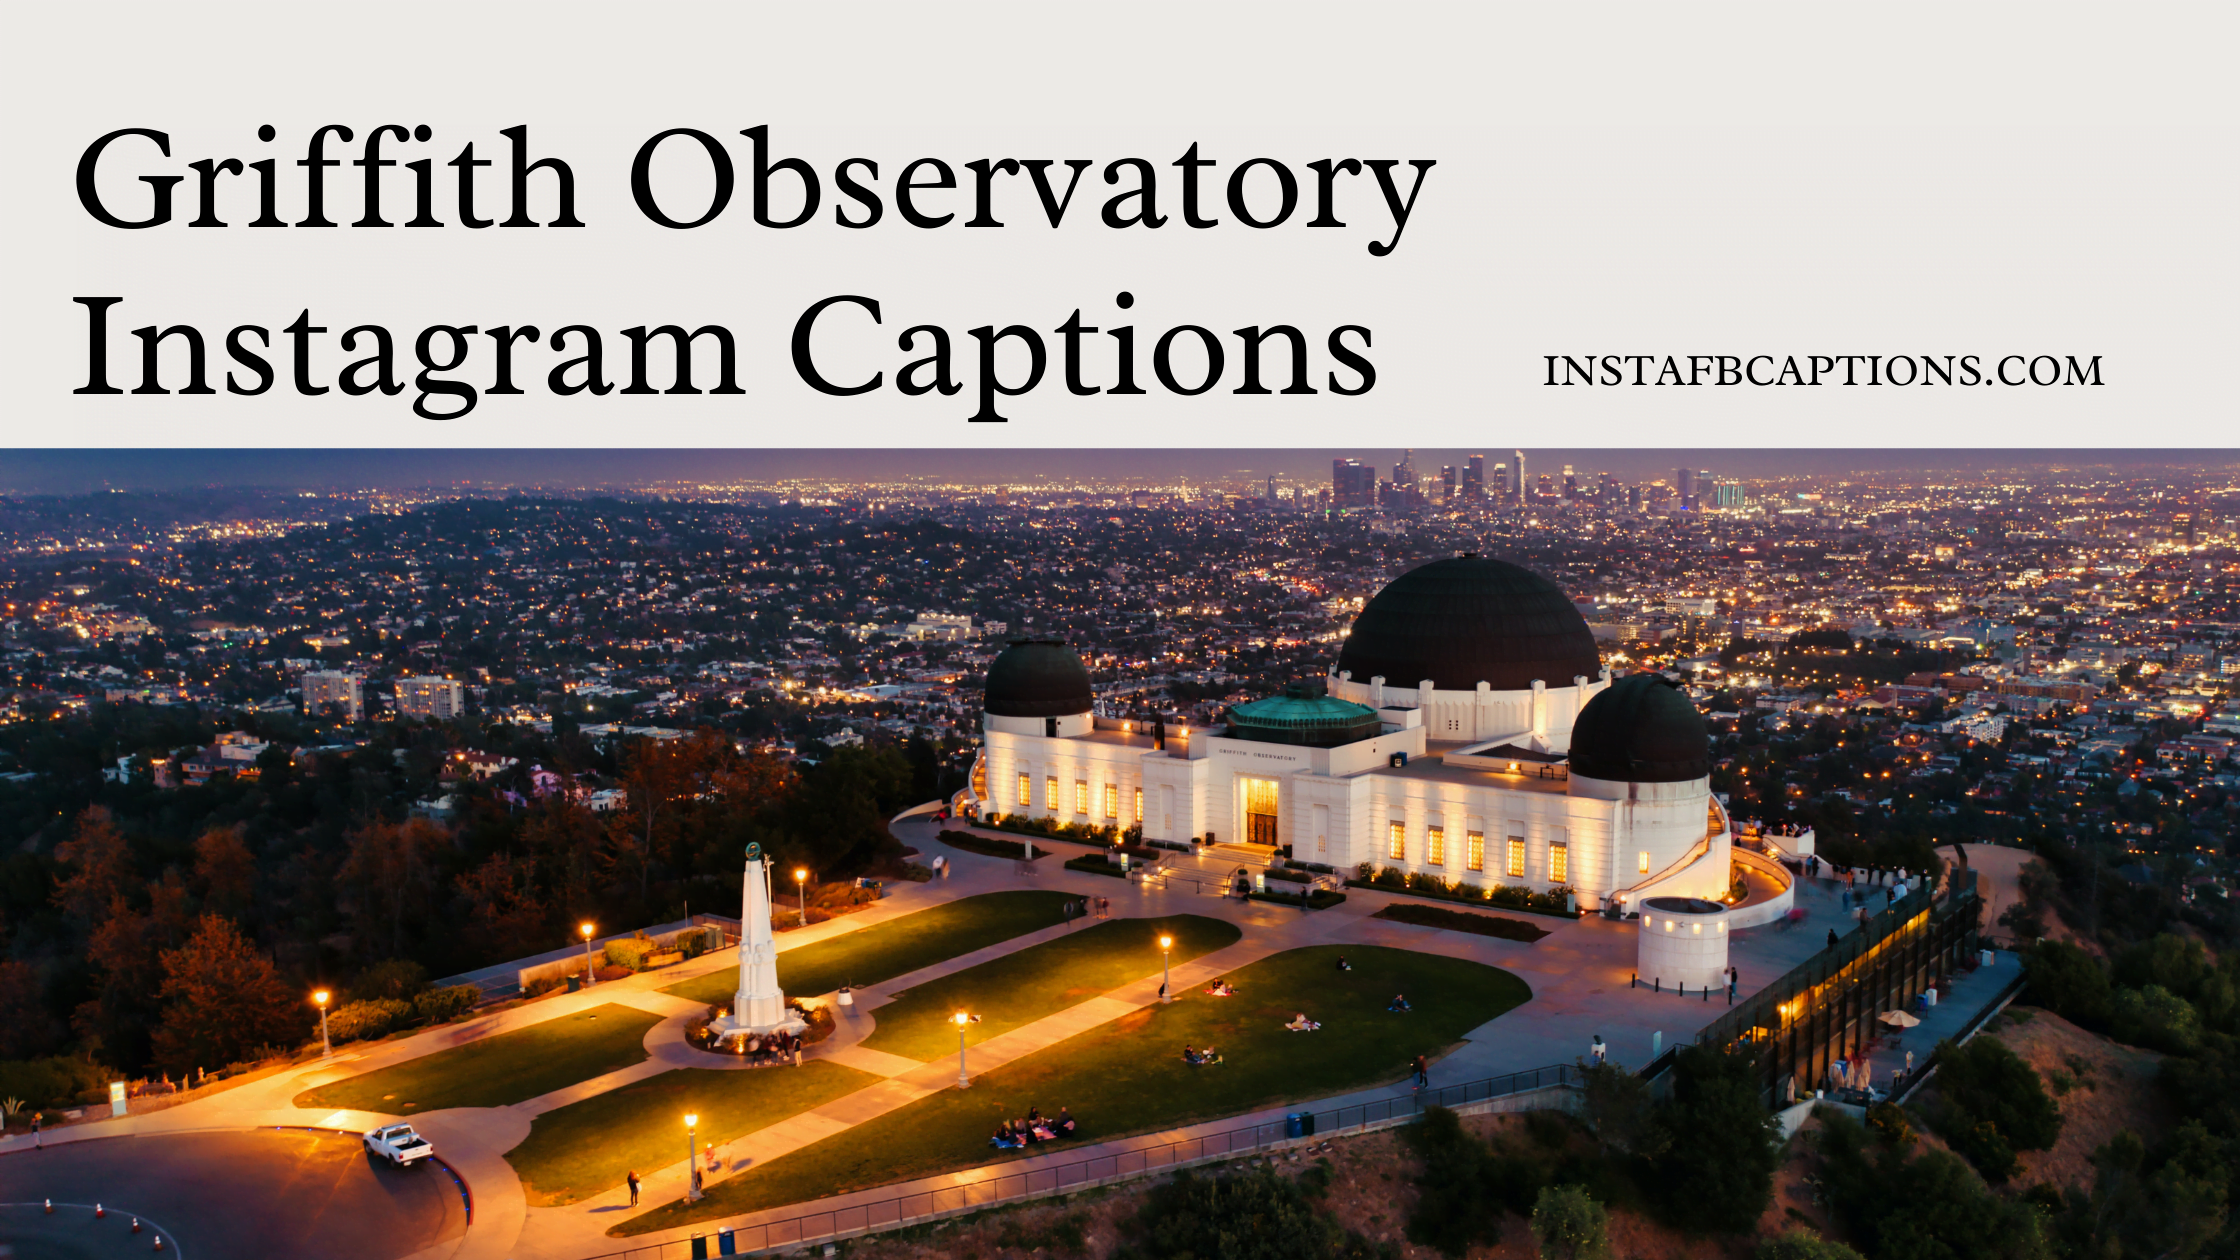 Griffith Observatory Instagram Captions  - Griffith Observatory Instagram Captions - 101 Griffith Observatory Instagram Captions Quotes Hashtags 2023